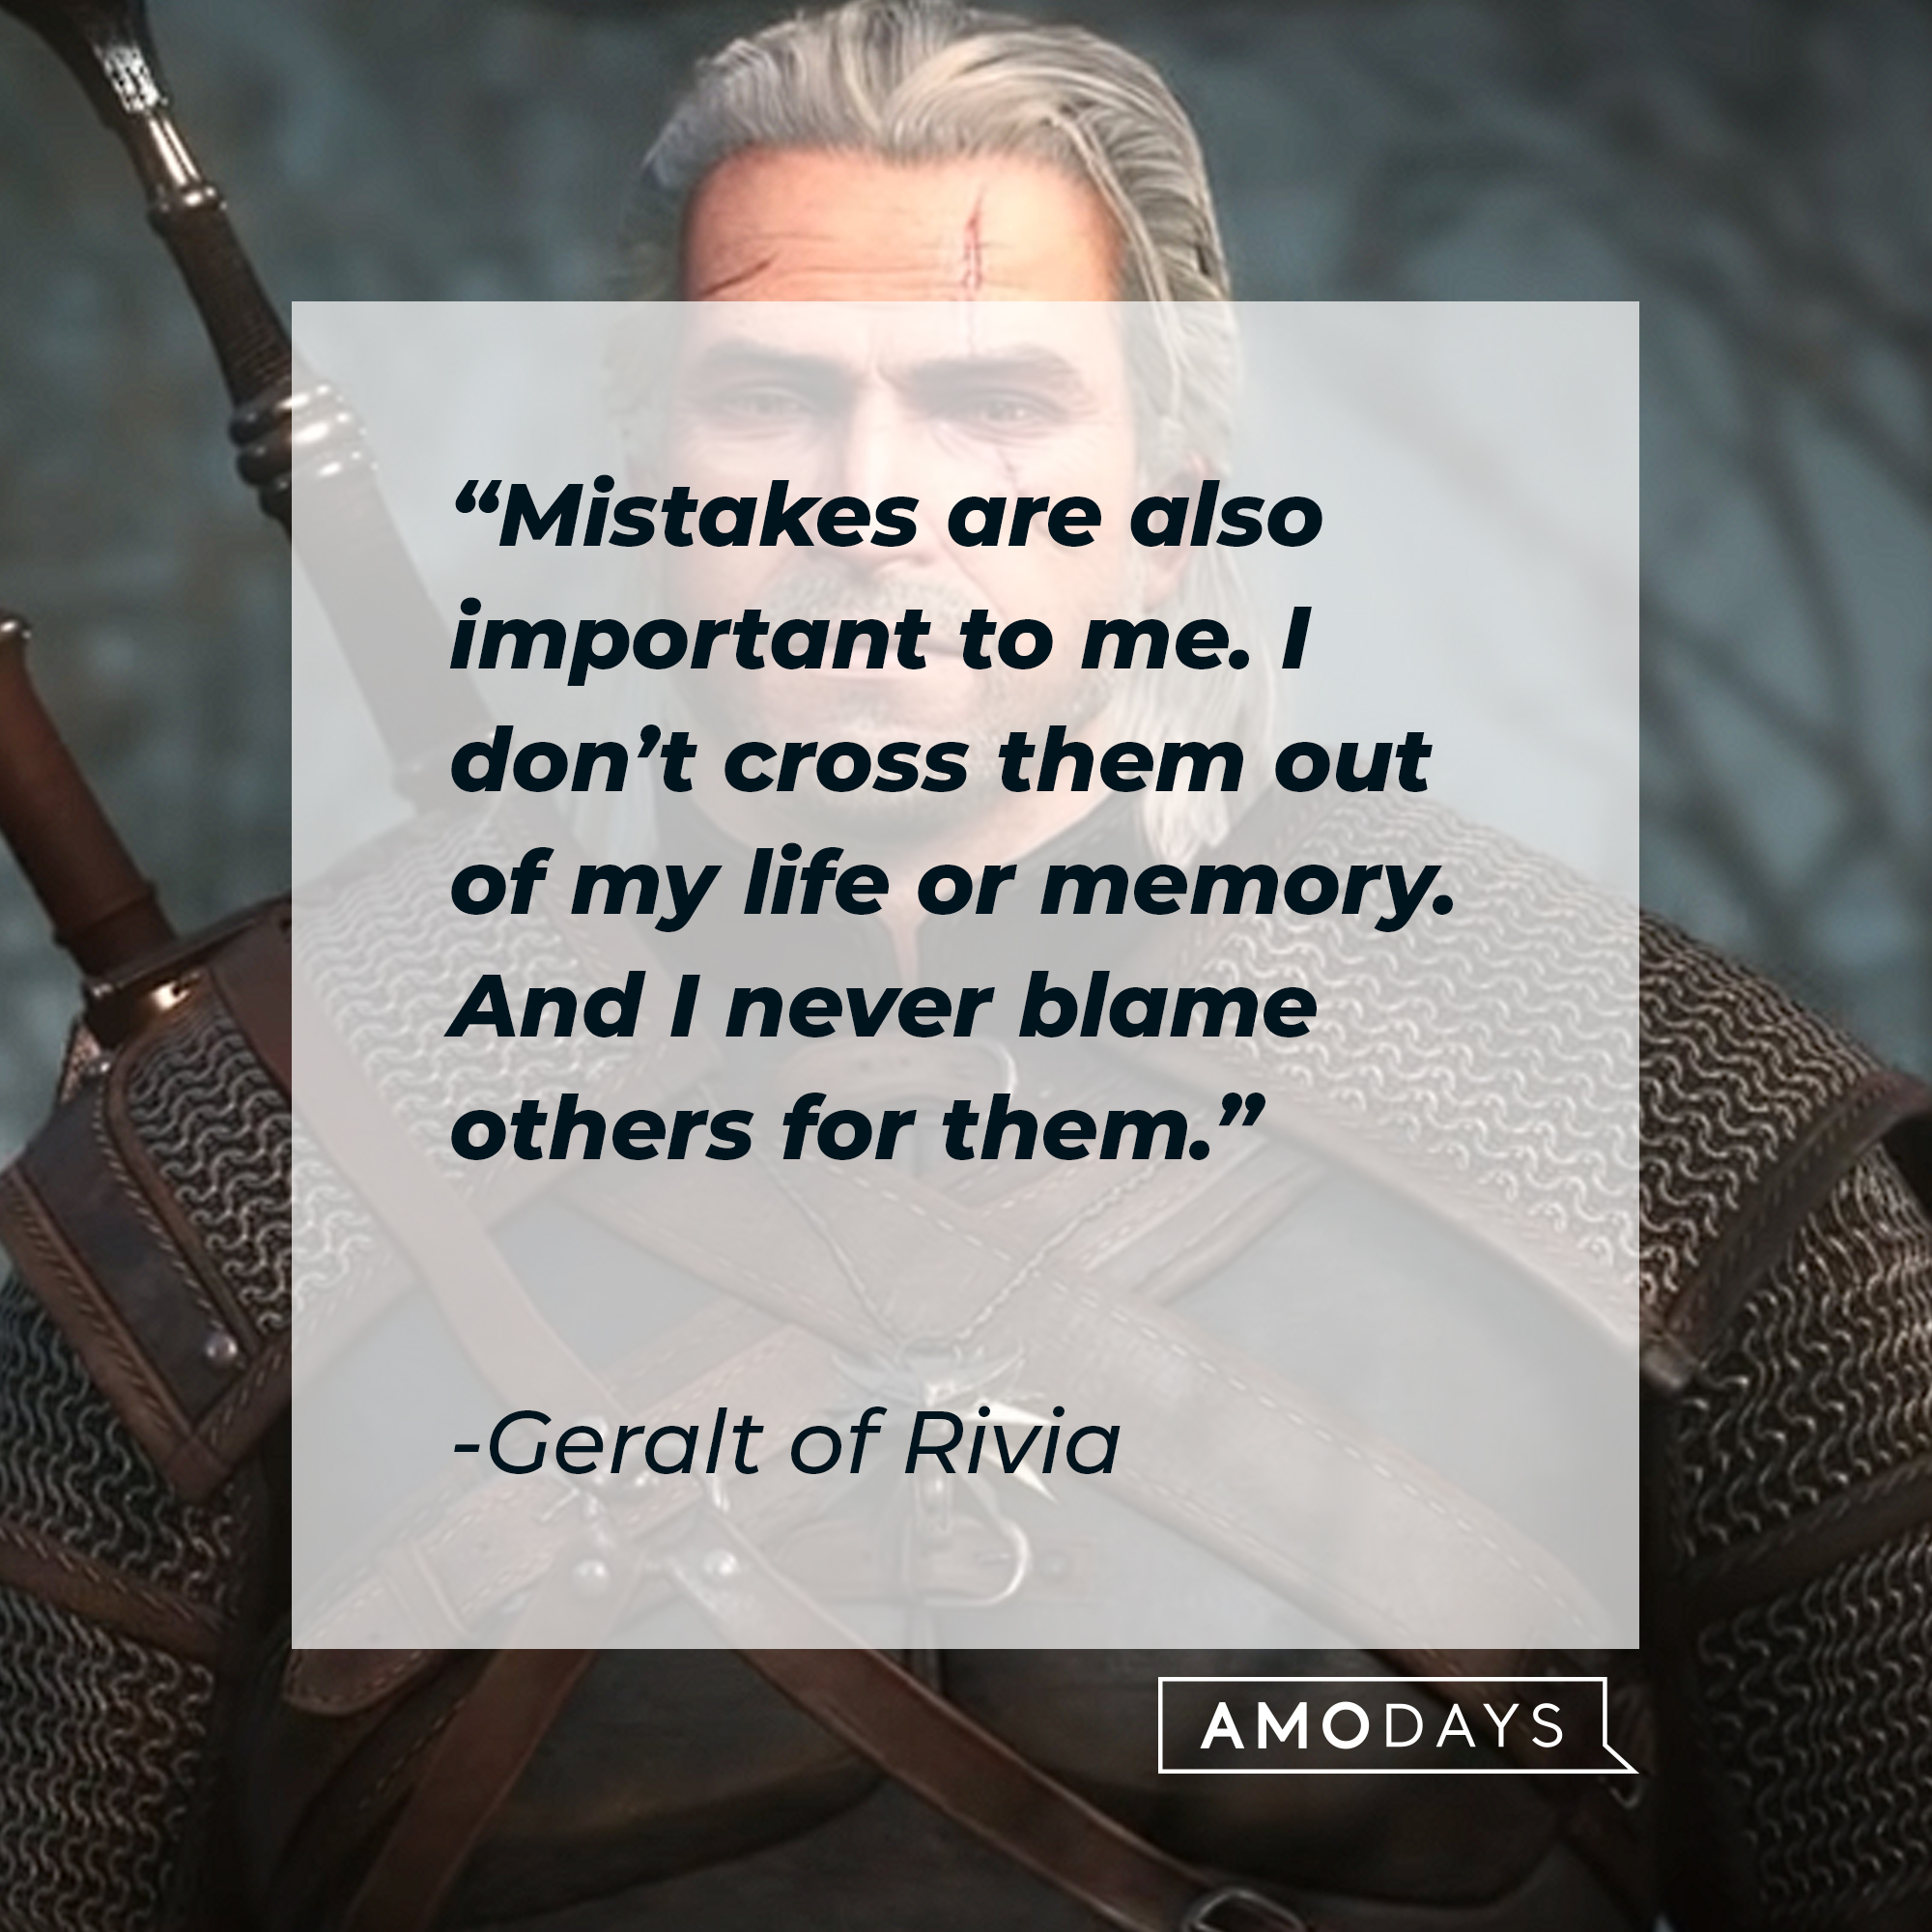 Geralt of Rivia from the video game with his quote: “Mistakes are also important to me. I don’t cross them out of my life or memory. And I never blame others for them.” | Source: youtube.com/thewitcher